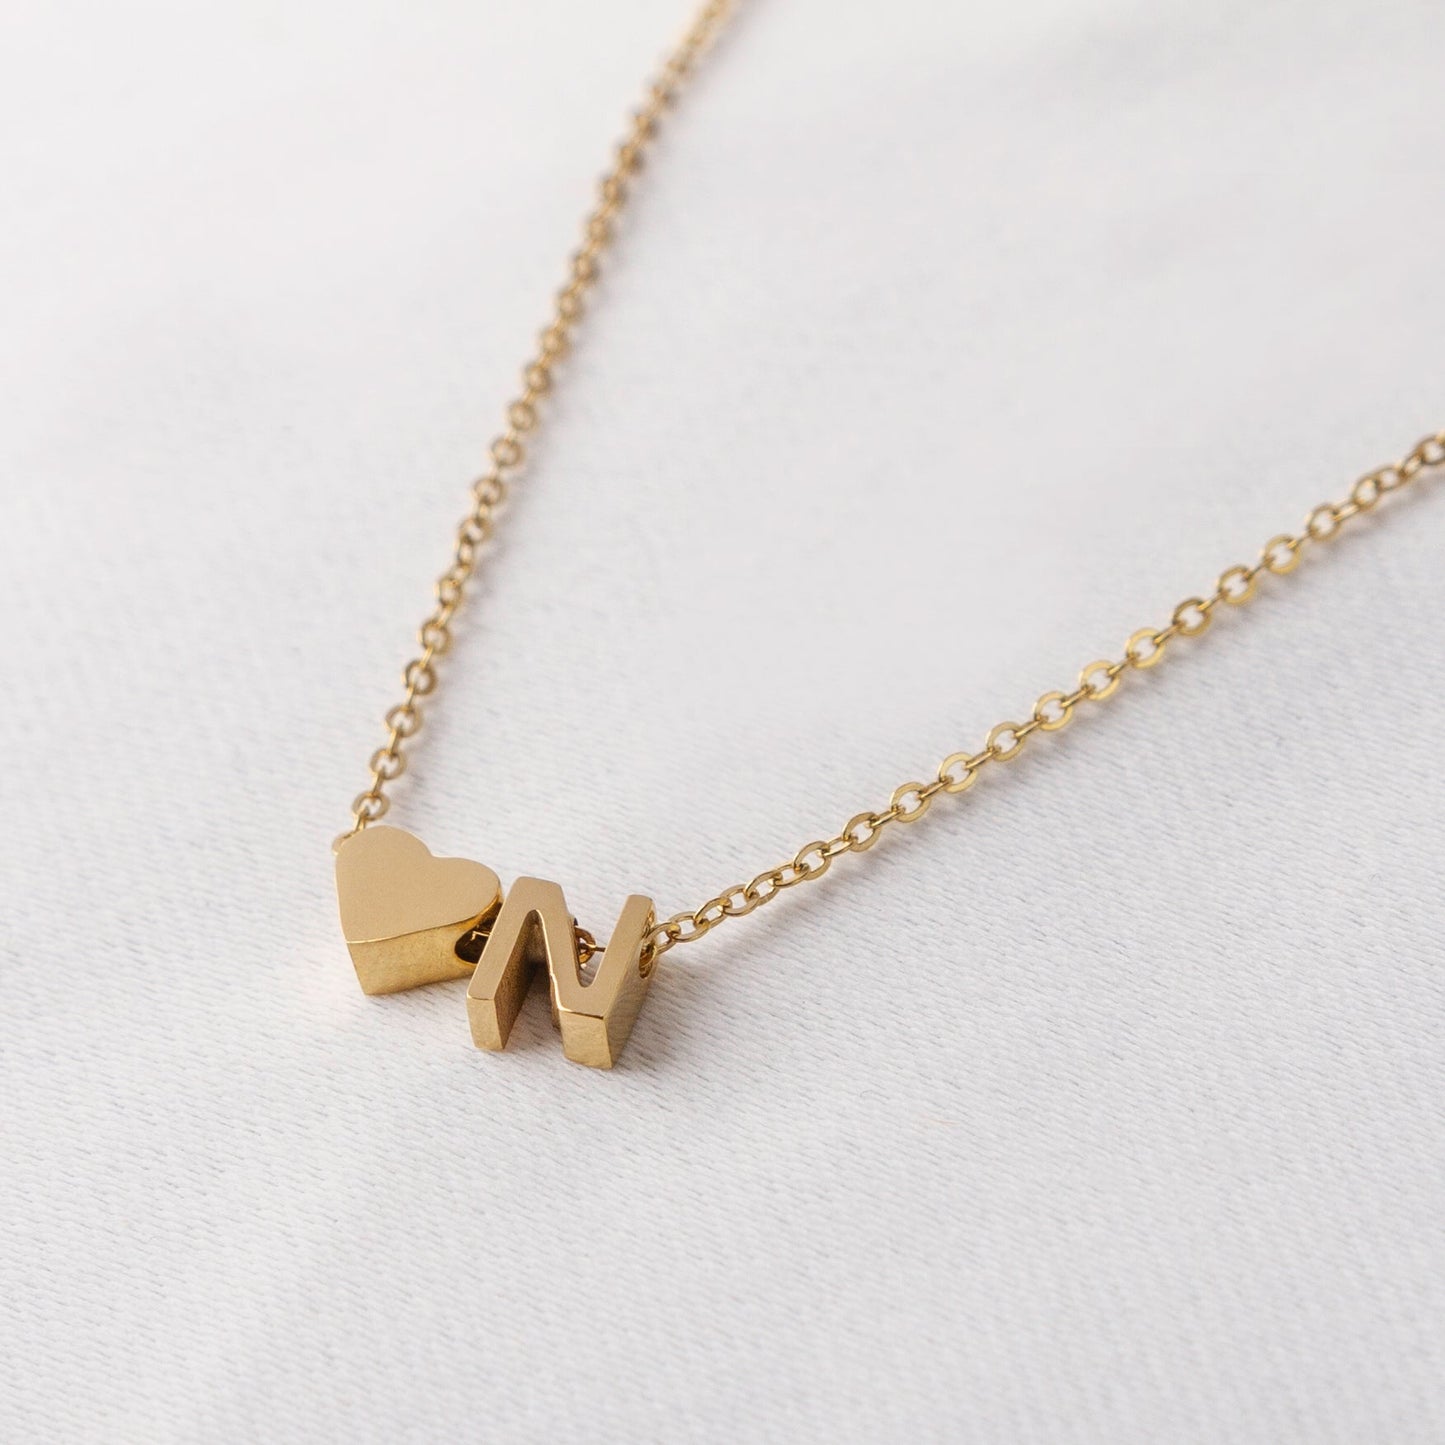 Fine and Yonder Gold Letter Necklace